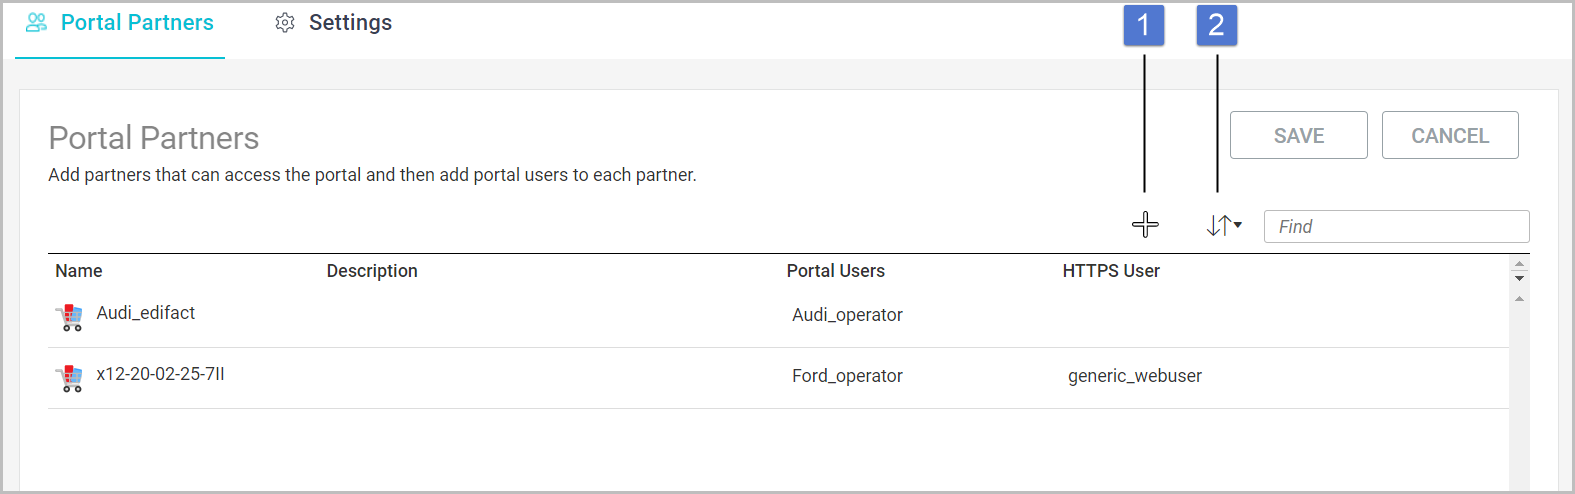 The Portal Partners tab shows two partners that can access the portal and their portal users. One of the partners also has an HTTPS user defined. Use the plus button to add more portal partners. You can use the up and down arrows to sort the display.
			 